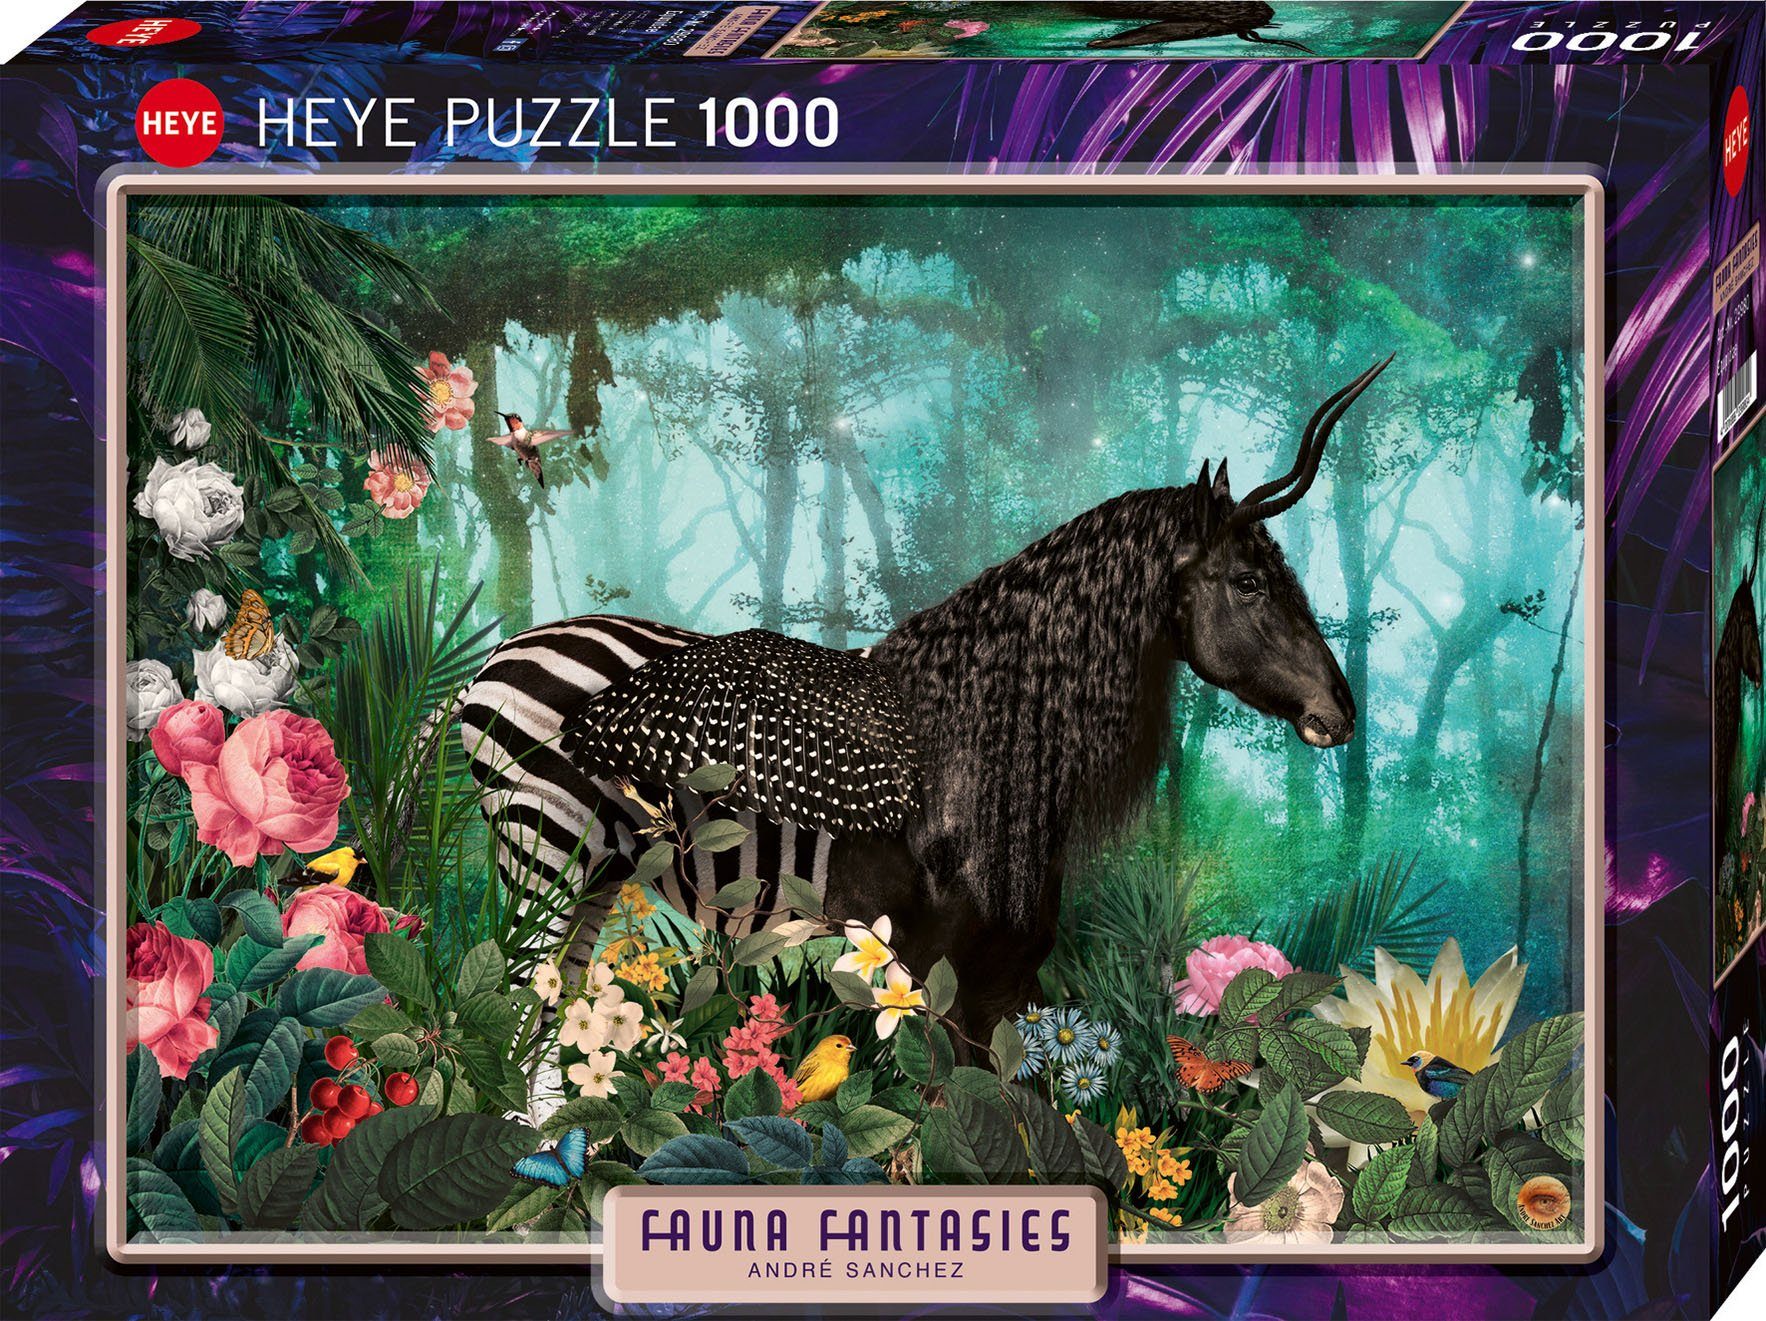 HEYE Puzzle Equpidae / Fauna Fantasies, 1000 Puzzleteile, Made in Germany